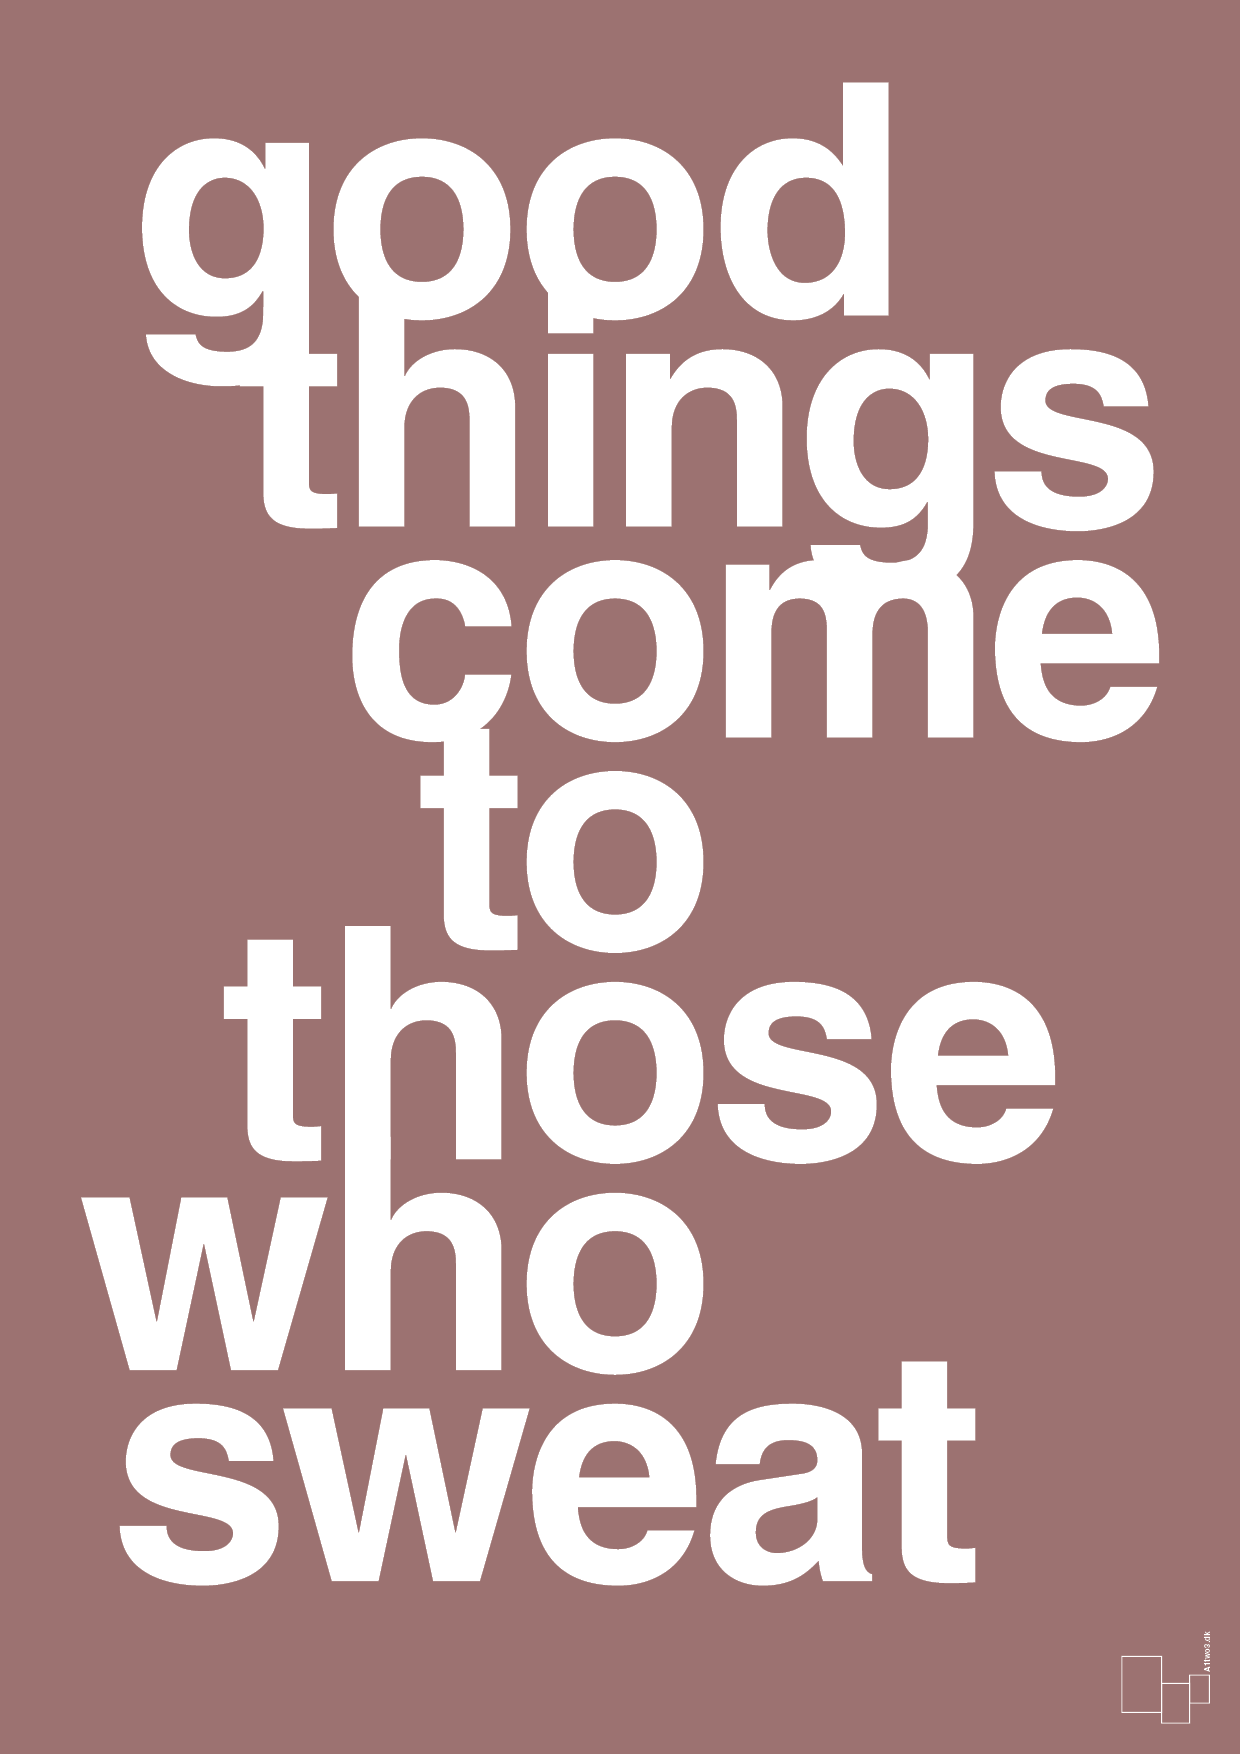 good things come to those who sweat - Plakat med Sport & Fritid i Plum